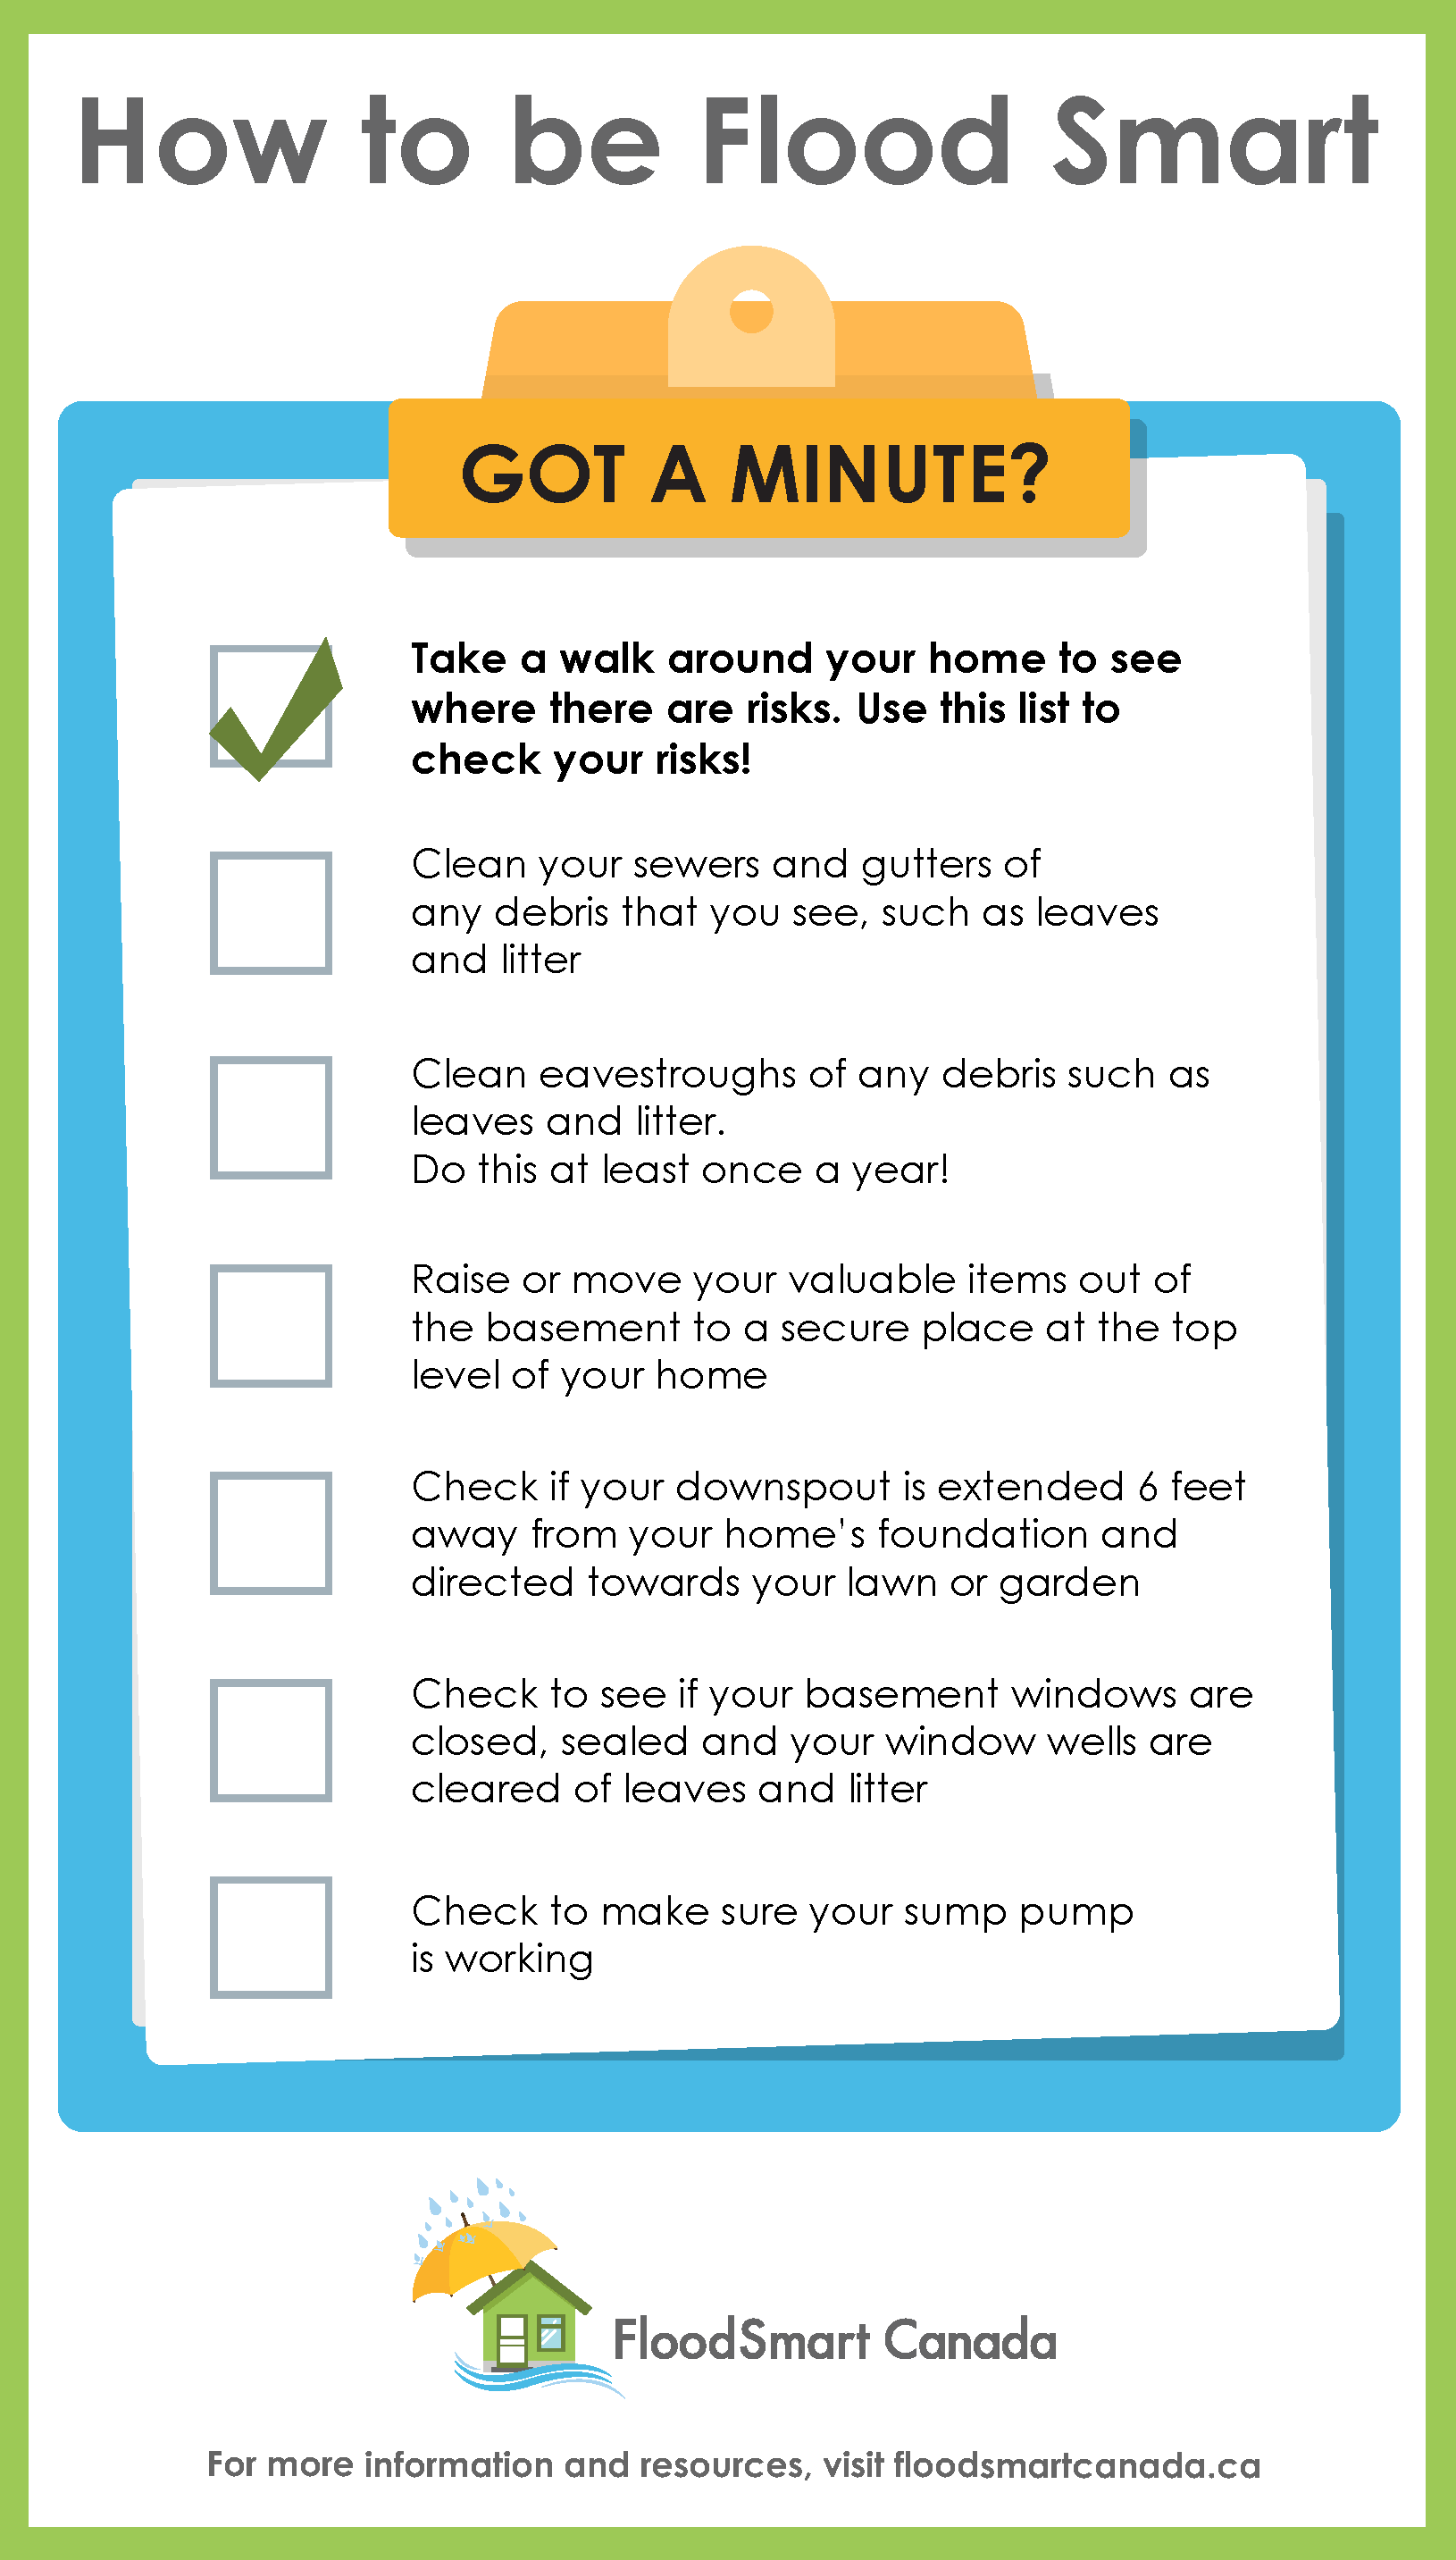 checklist of tasks you can do to be flood smart